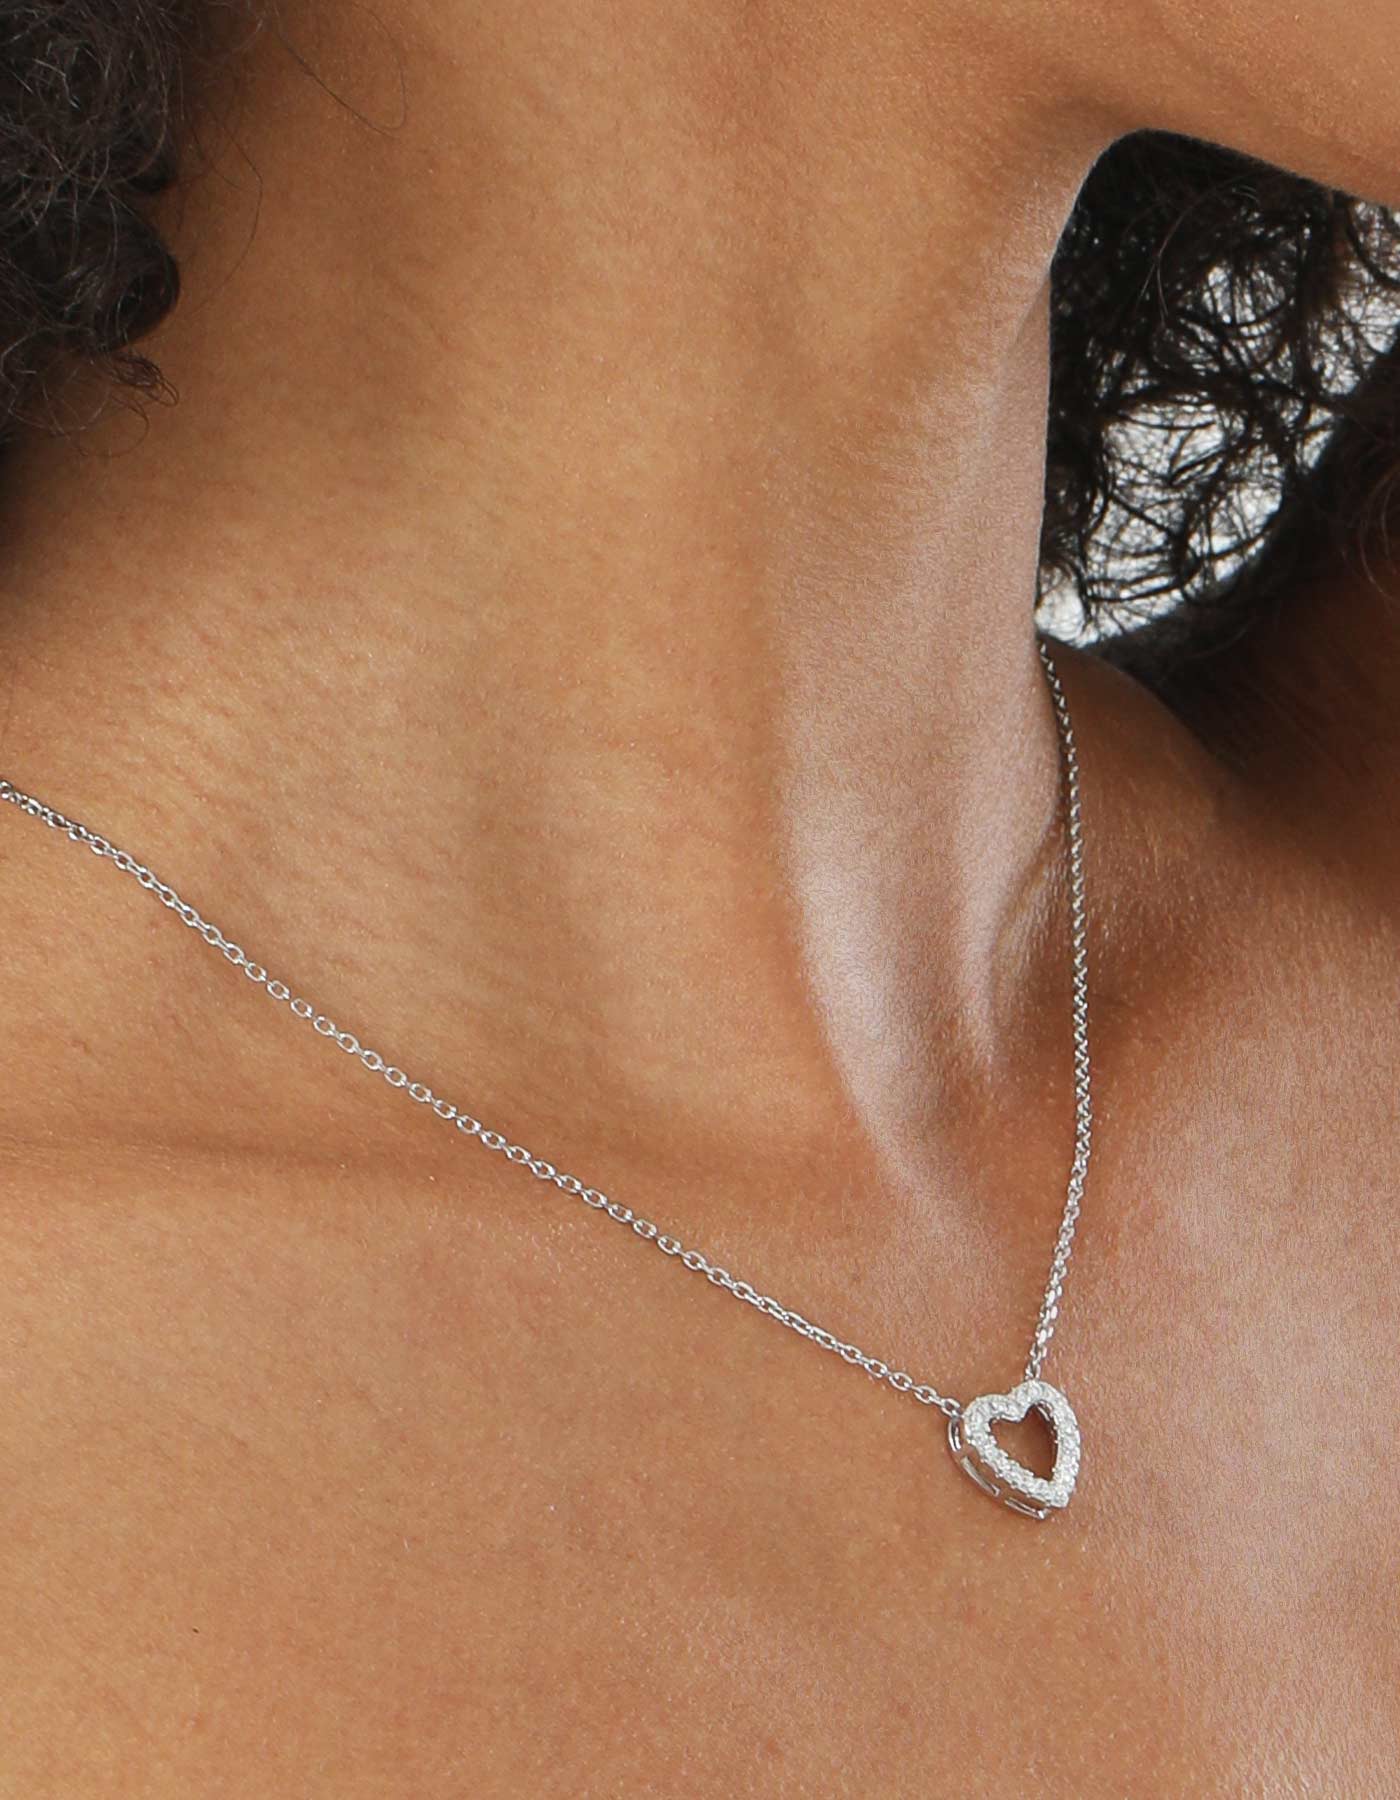 MomentWish Silver Heart Necklace